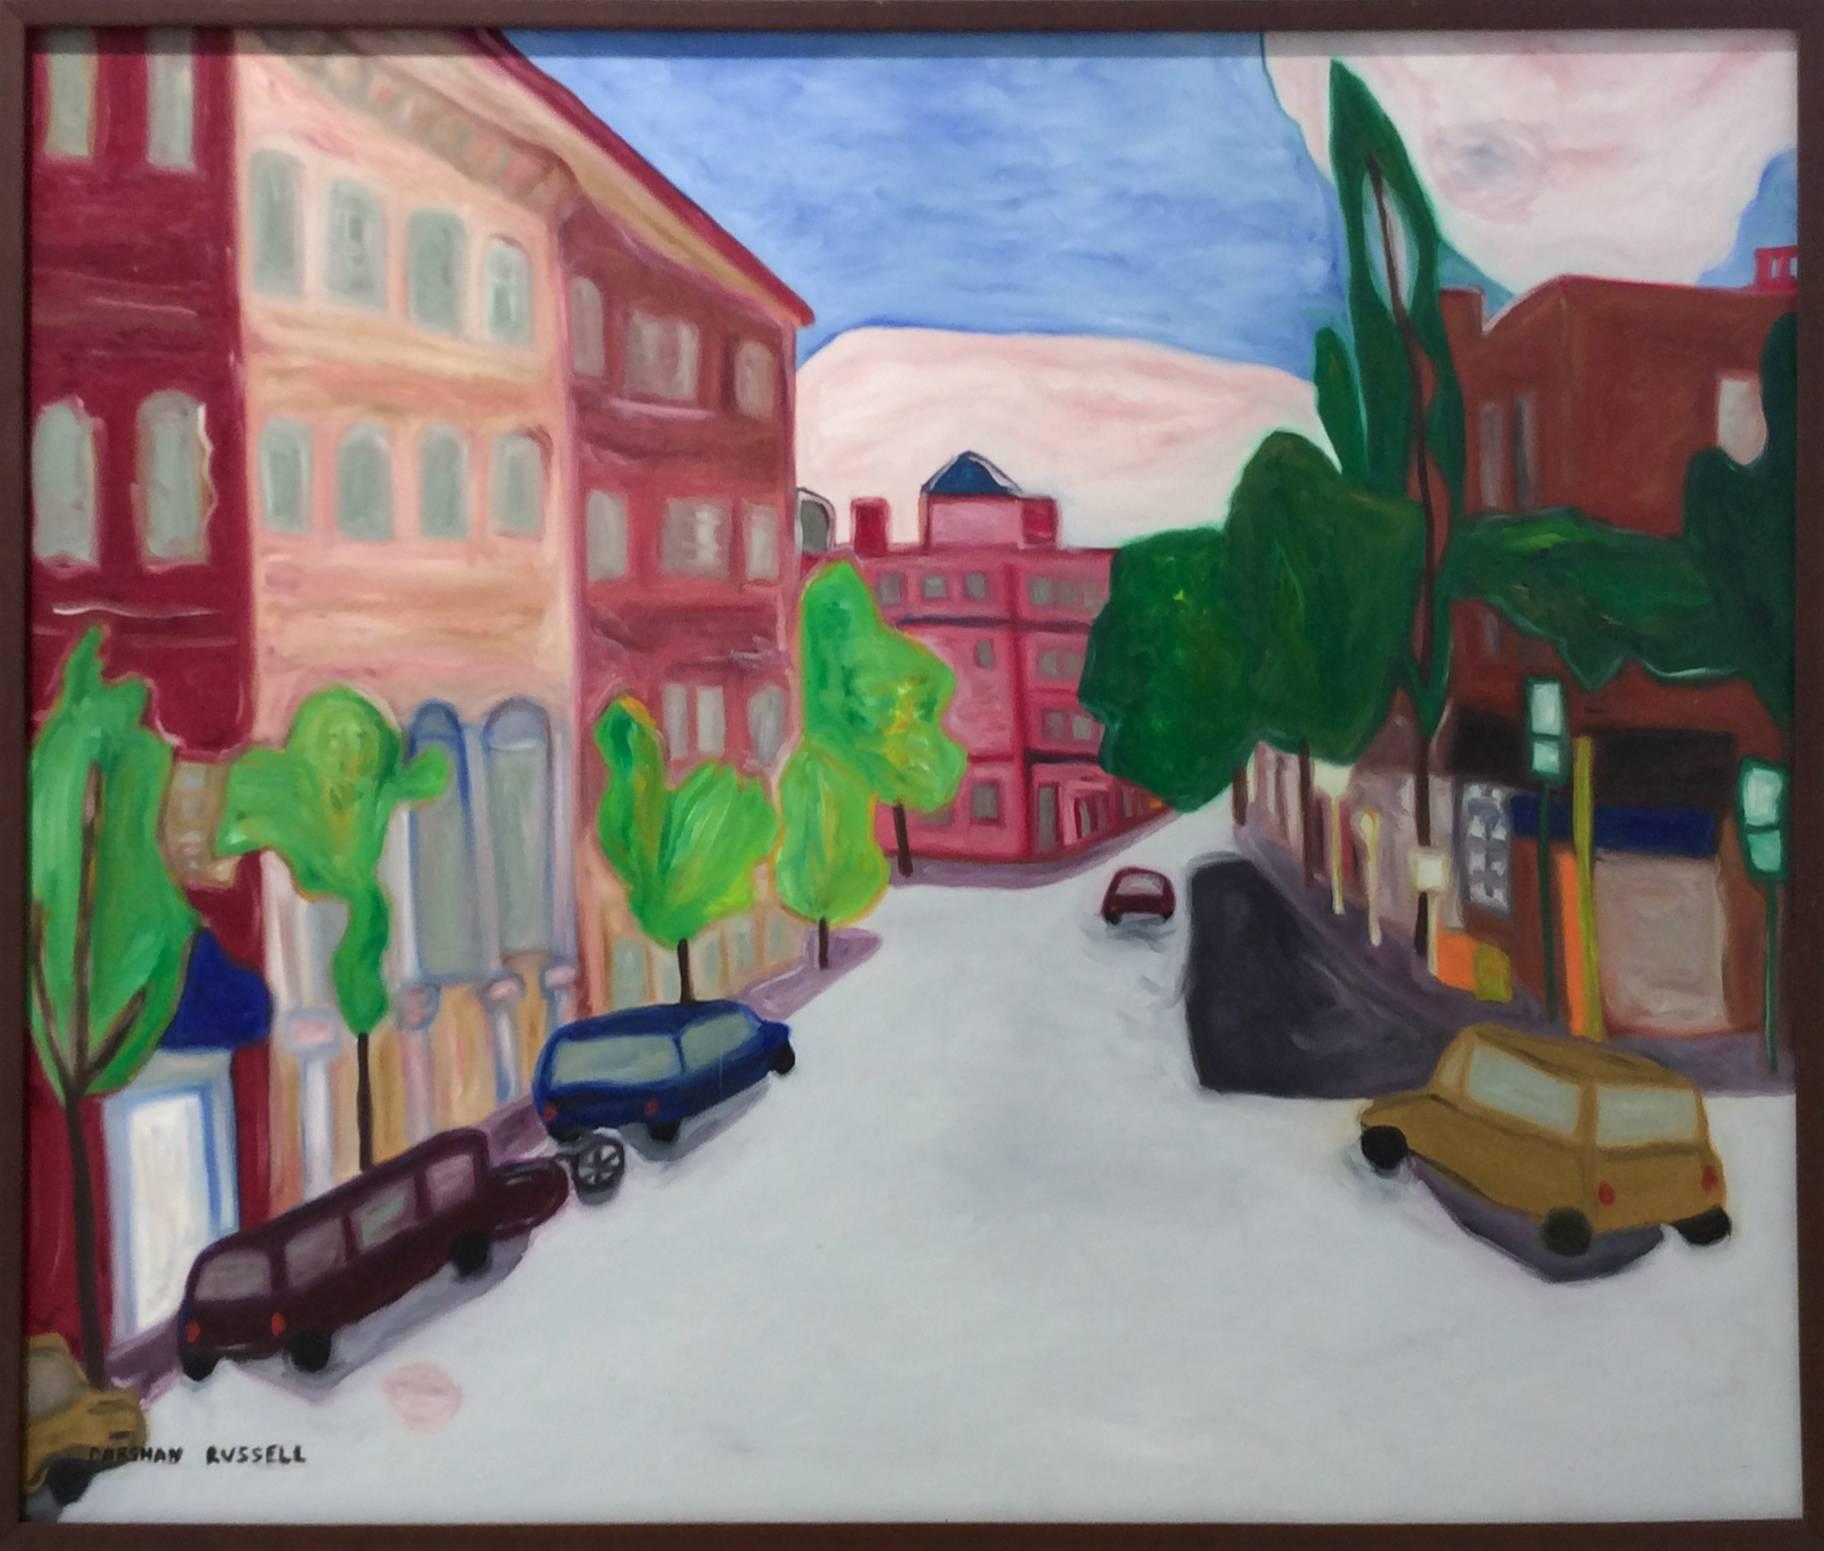 Darshan Russell Landscape Painting - Portland, Maine: Modern, Naive Style Cityscape of Red Brick Buildings & Blue Sky